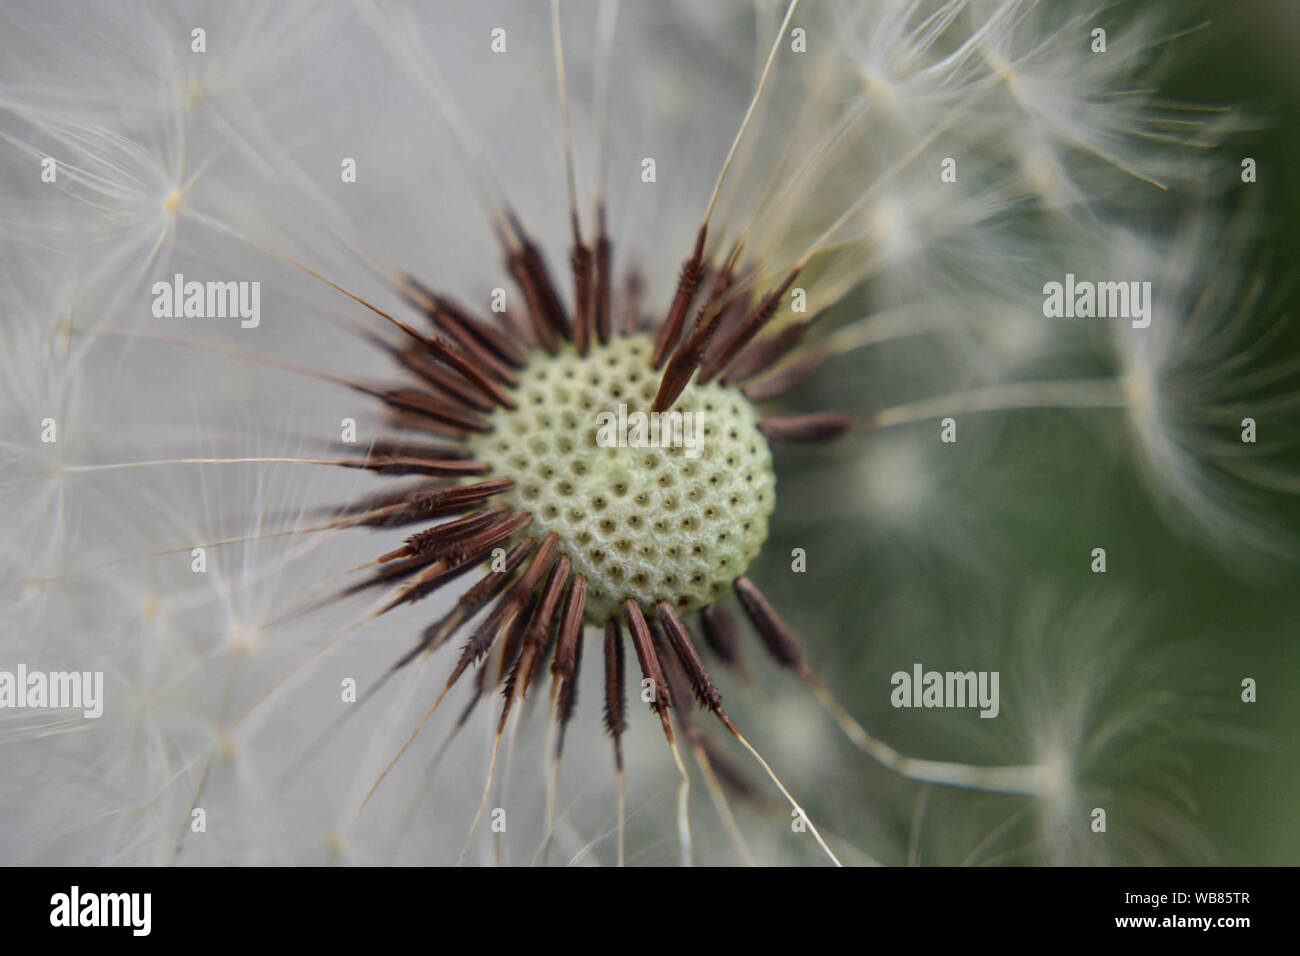 Closeup of dandelion seed/ conceptual image of luck and good wishes Stock Photo